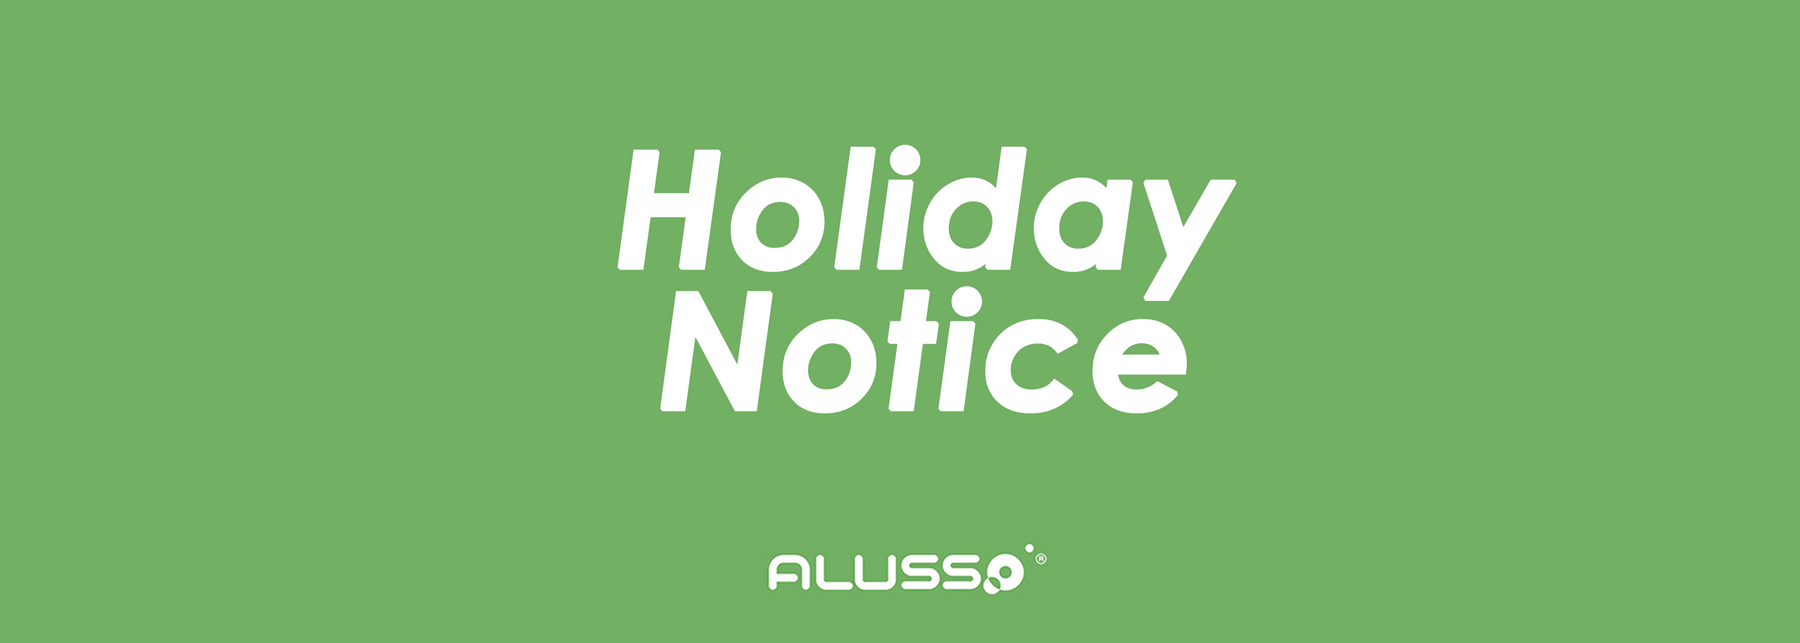 Alusso China office will close for the coming Labor’s Day holiday for 5 days